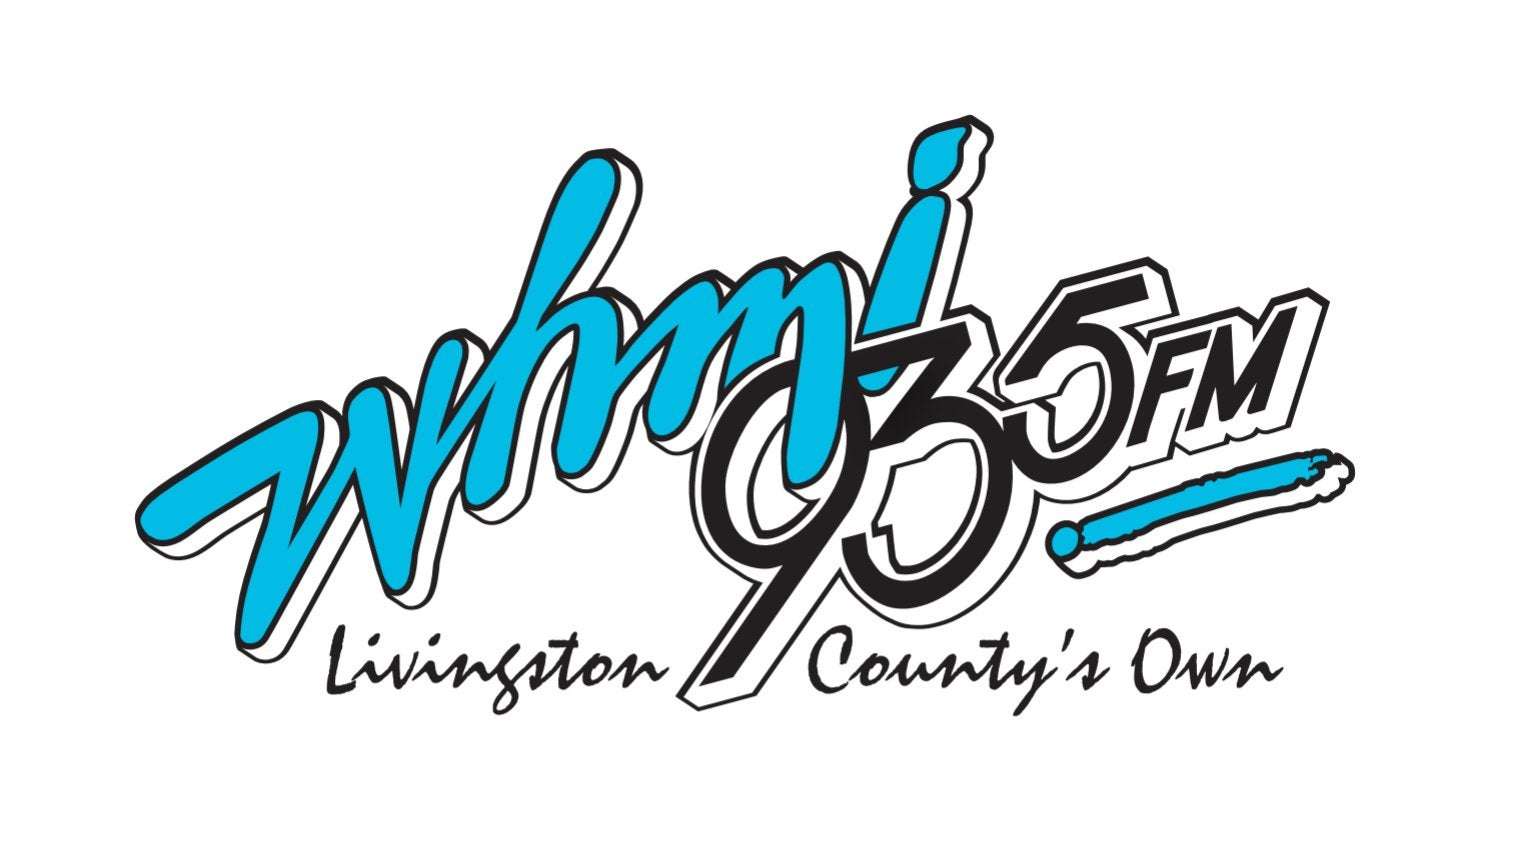 image for Radio Station WHMI 93.5 FM — Livingston County Michigan News, Weather, Traffic, Sports, School Updates, and the Best Classic Hit